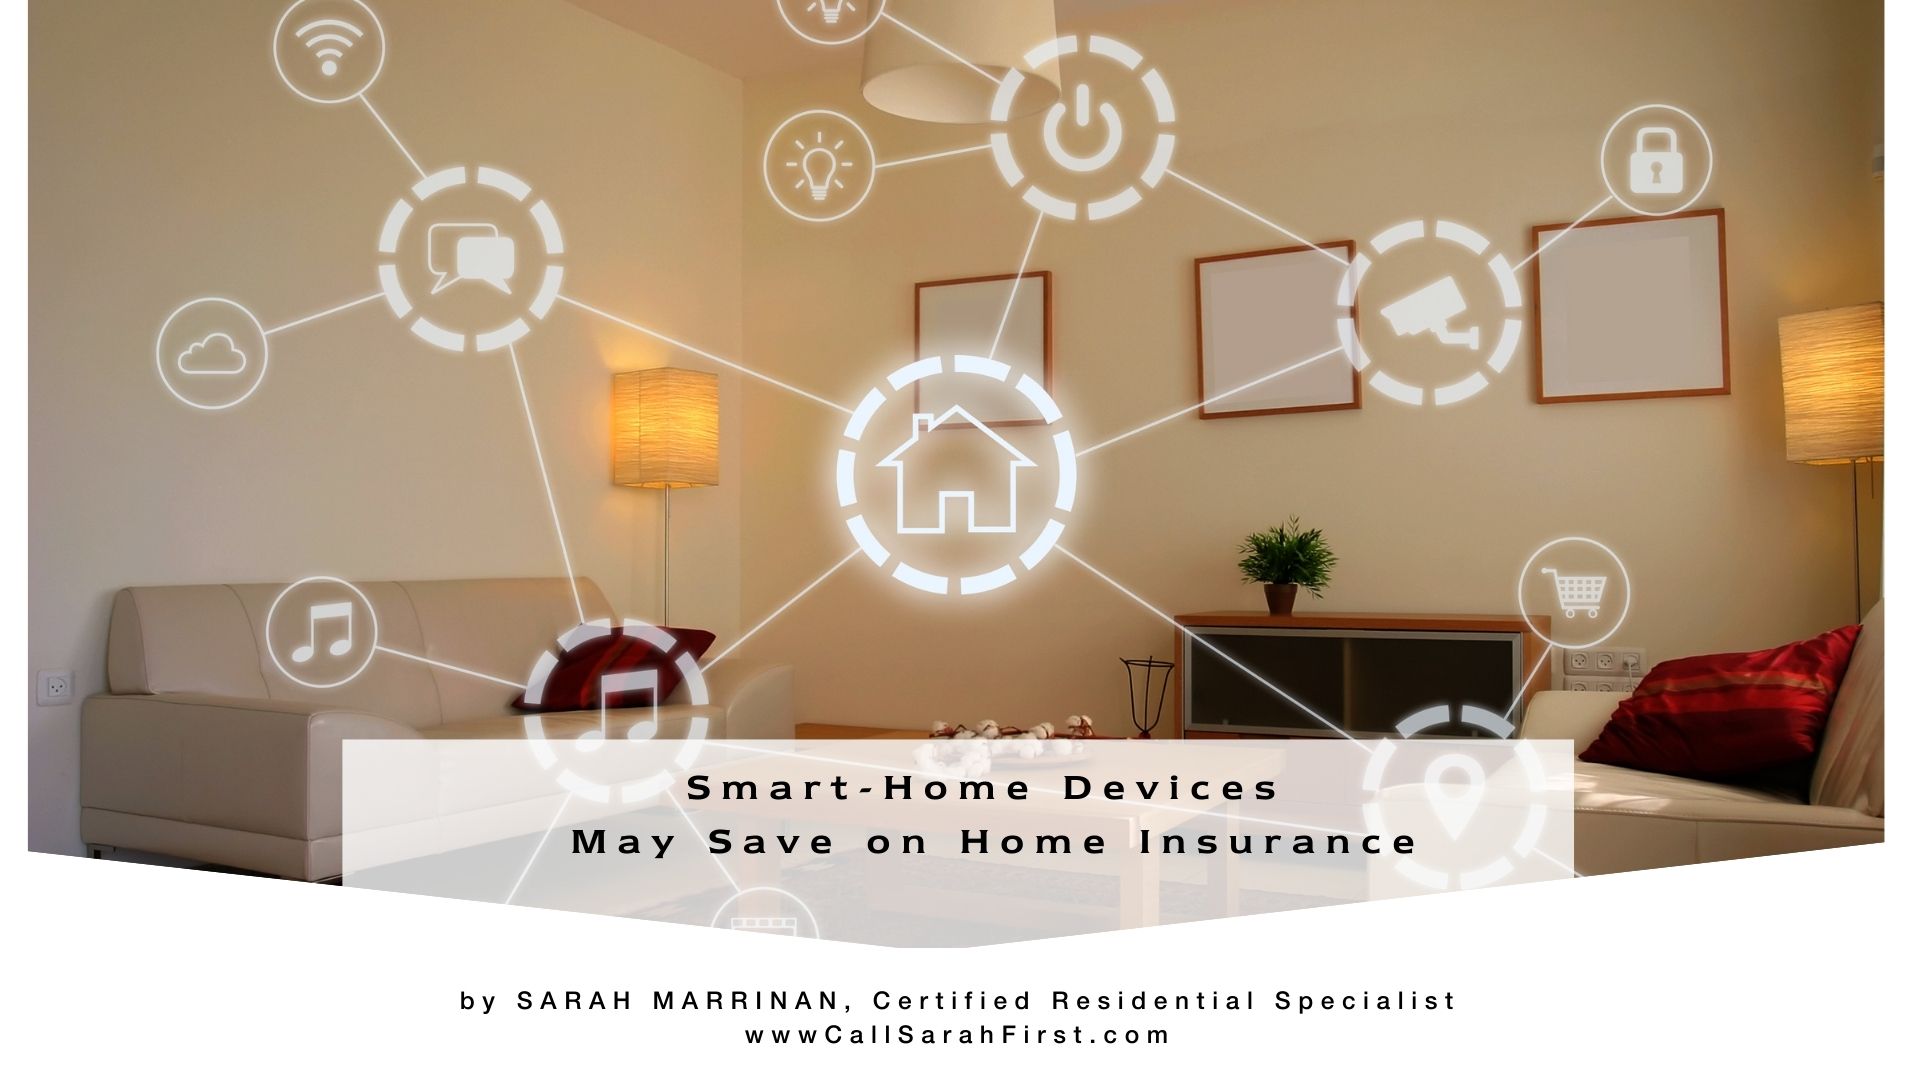 Smart-Home Devices May Save on Home Insurance